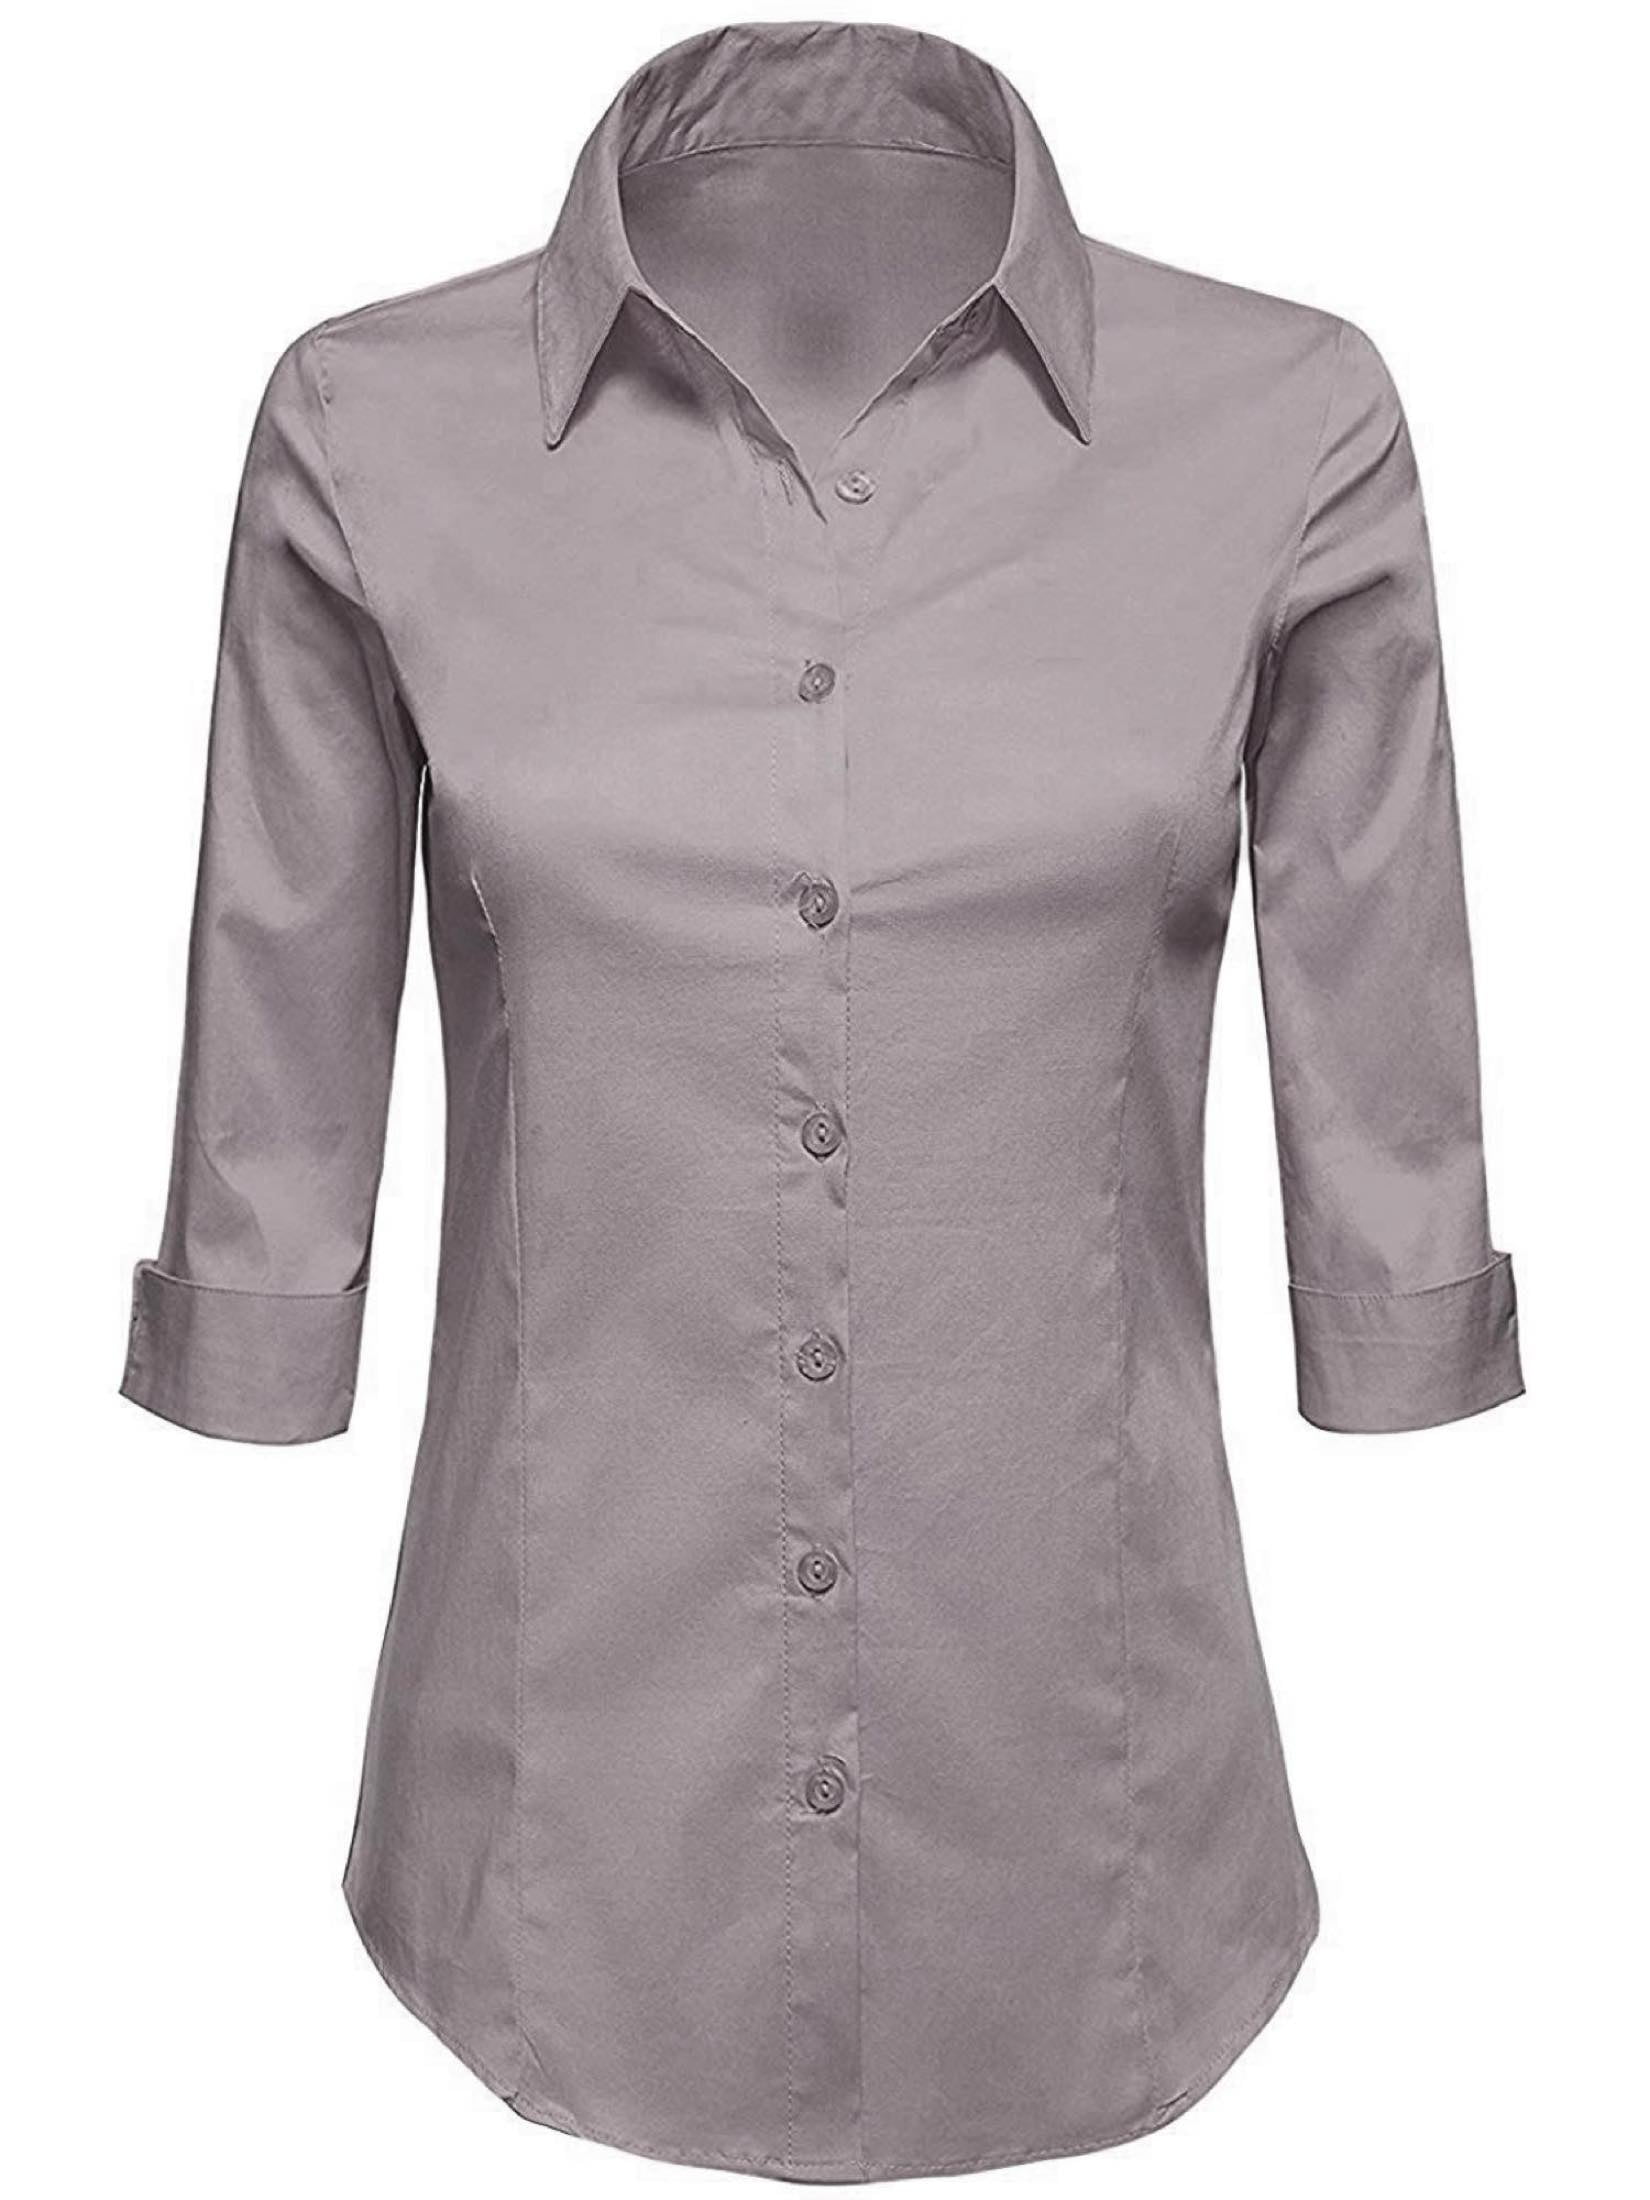 Mbj Wt Womens Sleeve Tailored Button Down Shirts Xl Grey